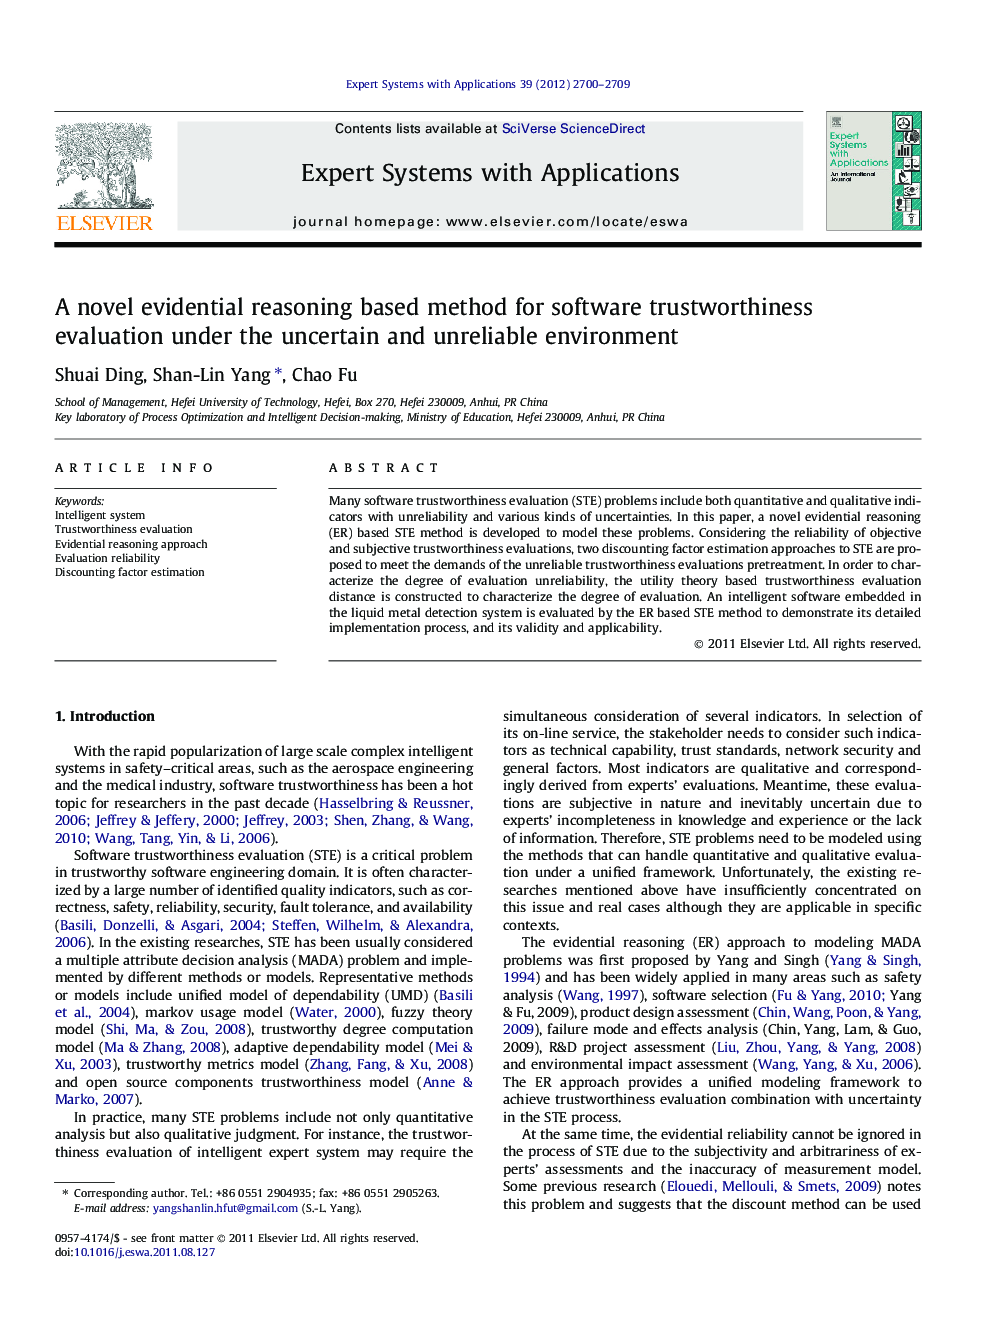 A novel evidential reasoning based method for software trustworthiness evaluation under the uncertain and unreliable environment